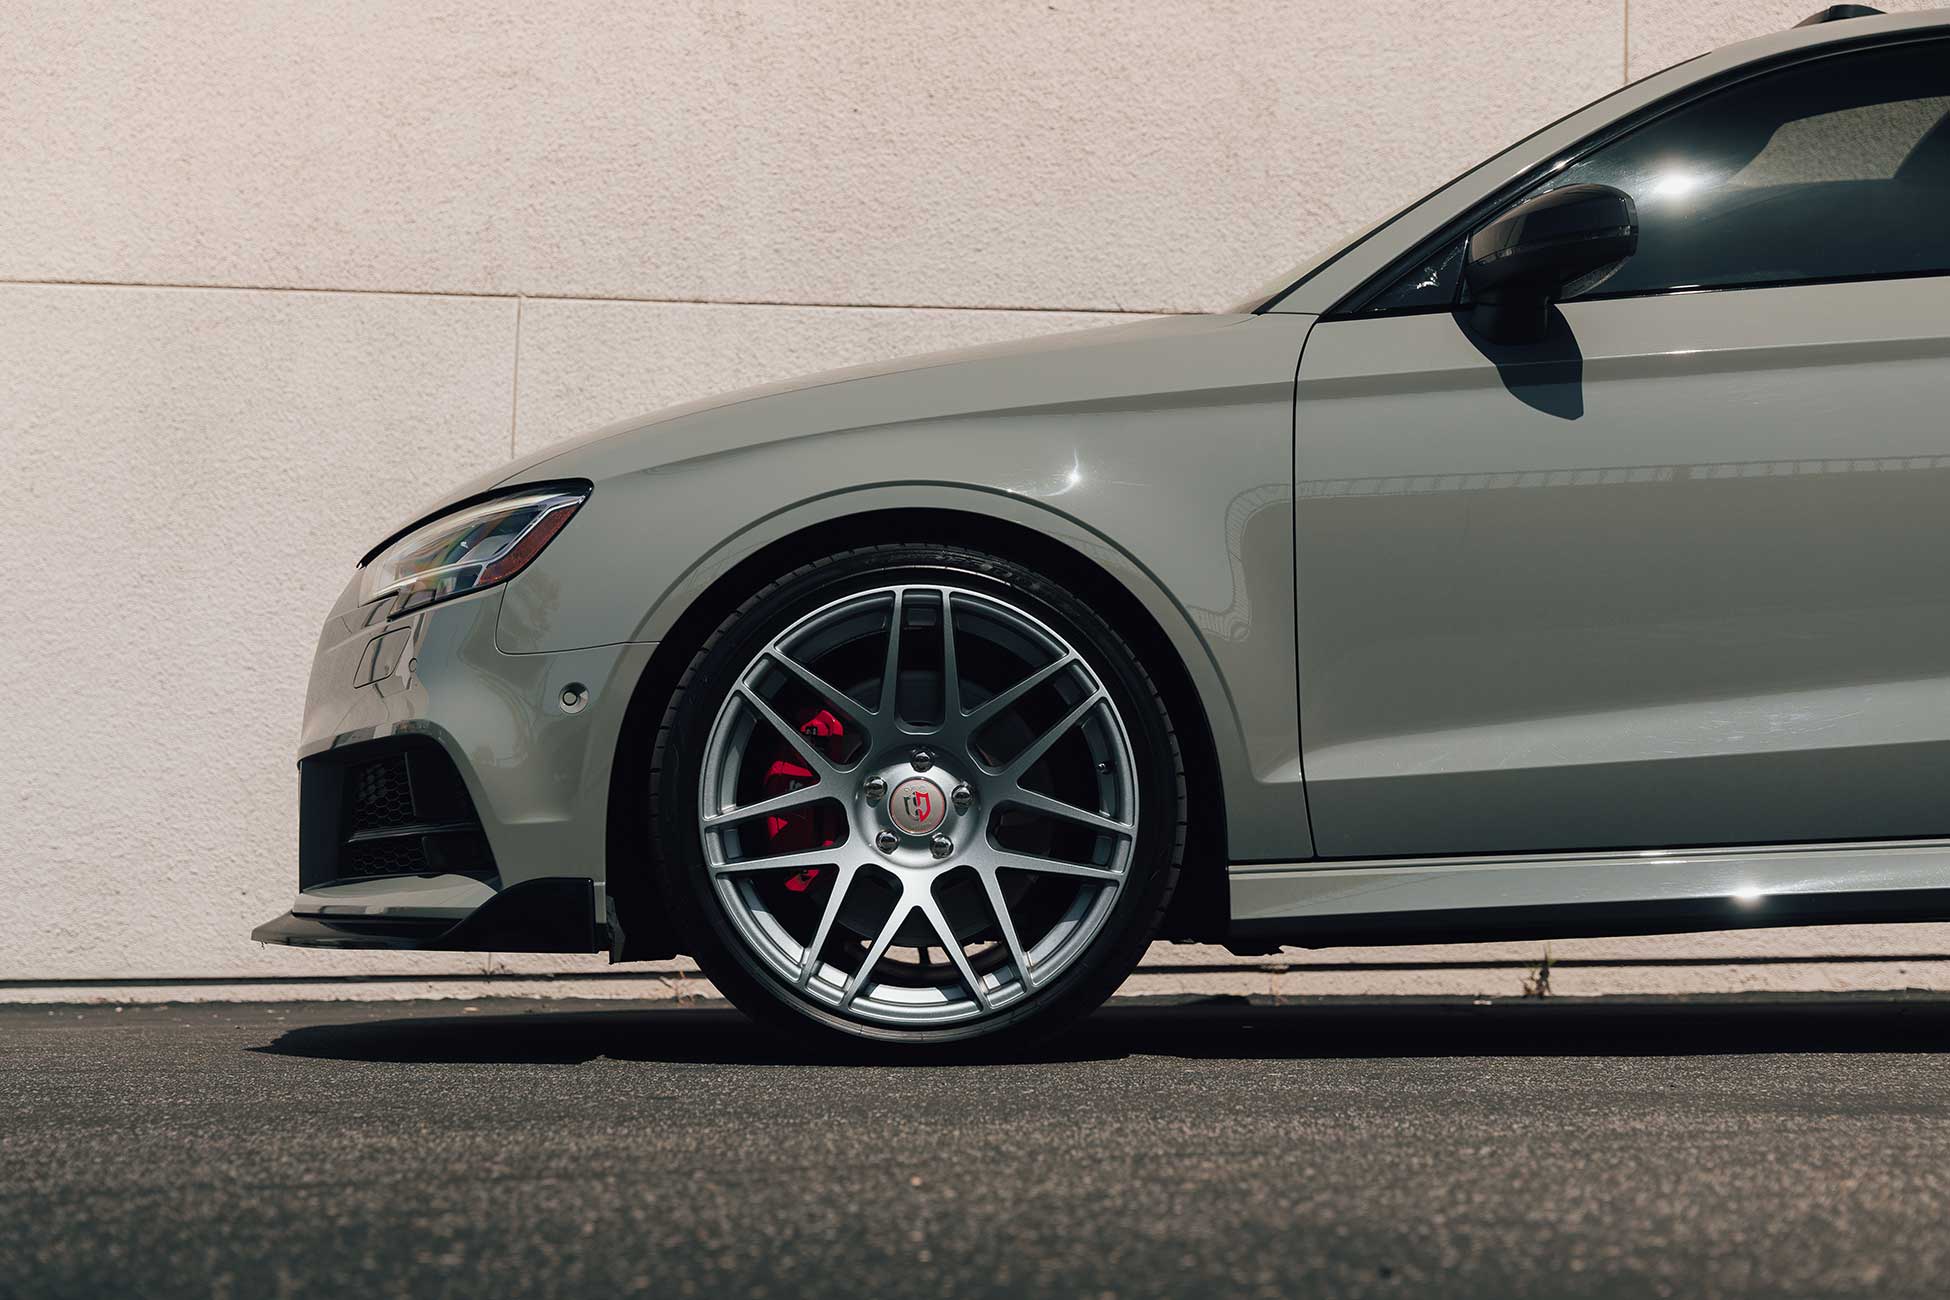 An 8V Audi S3 with 19x9 Curva Concepts C300 wheels in a gunmetal finish